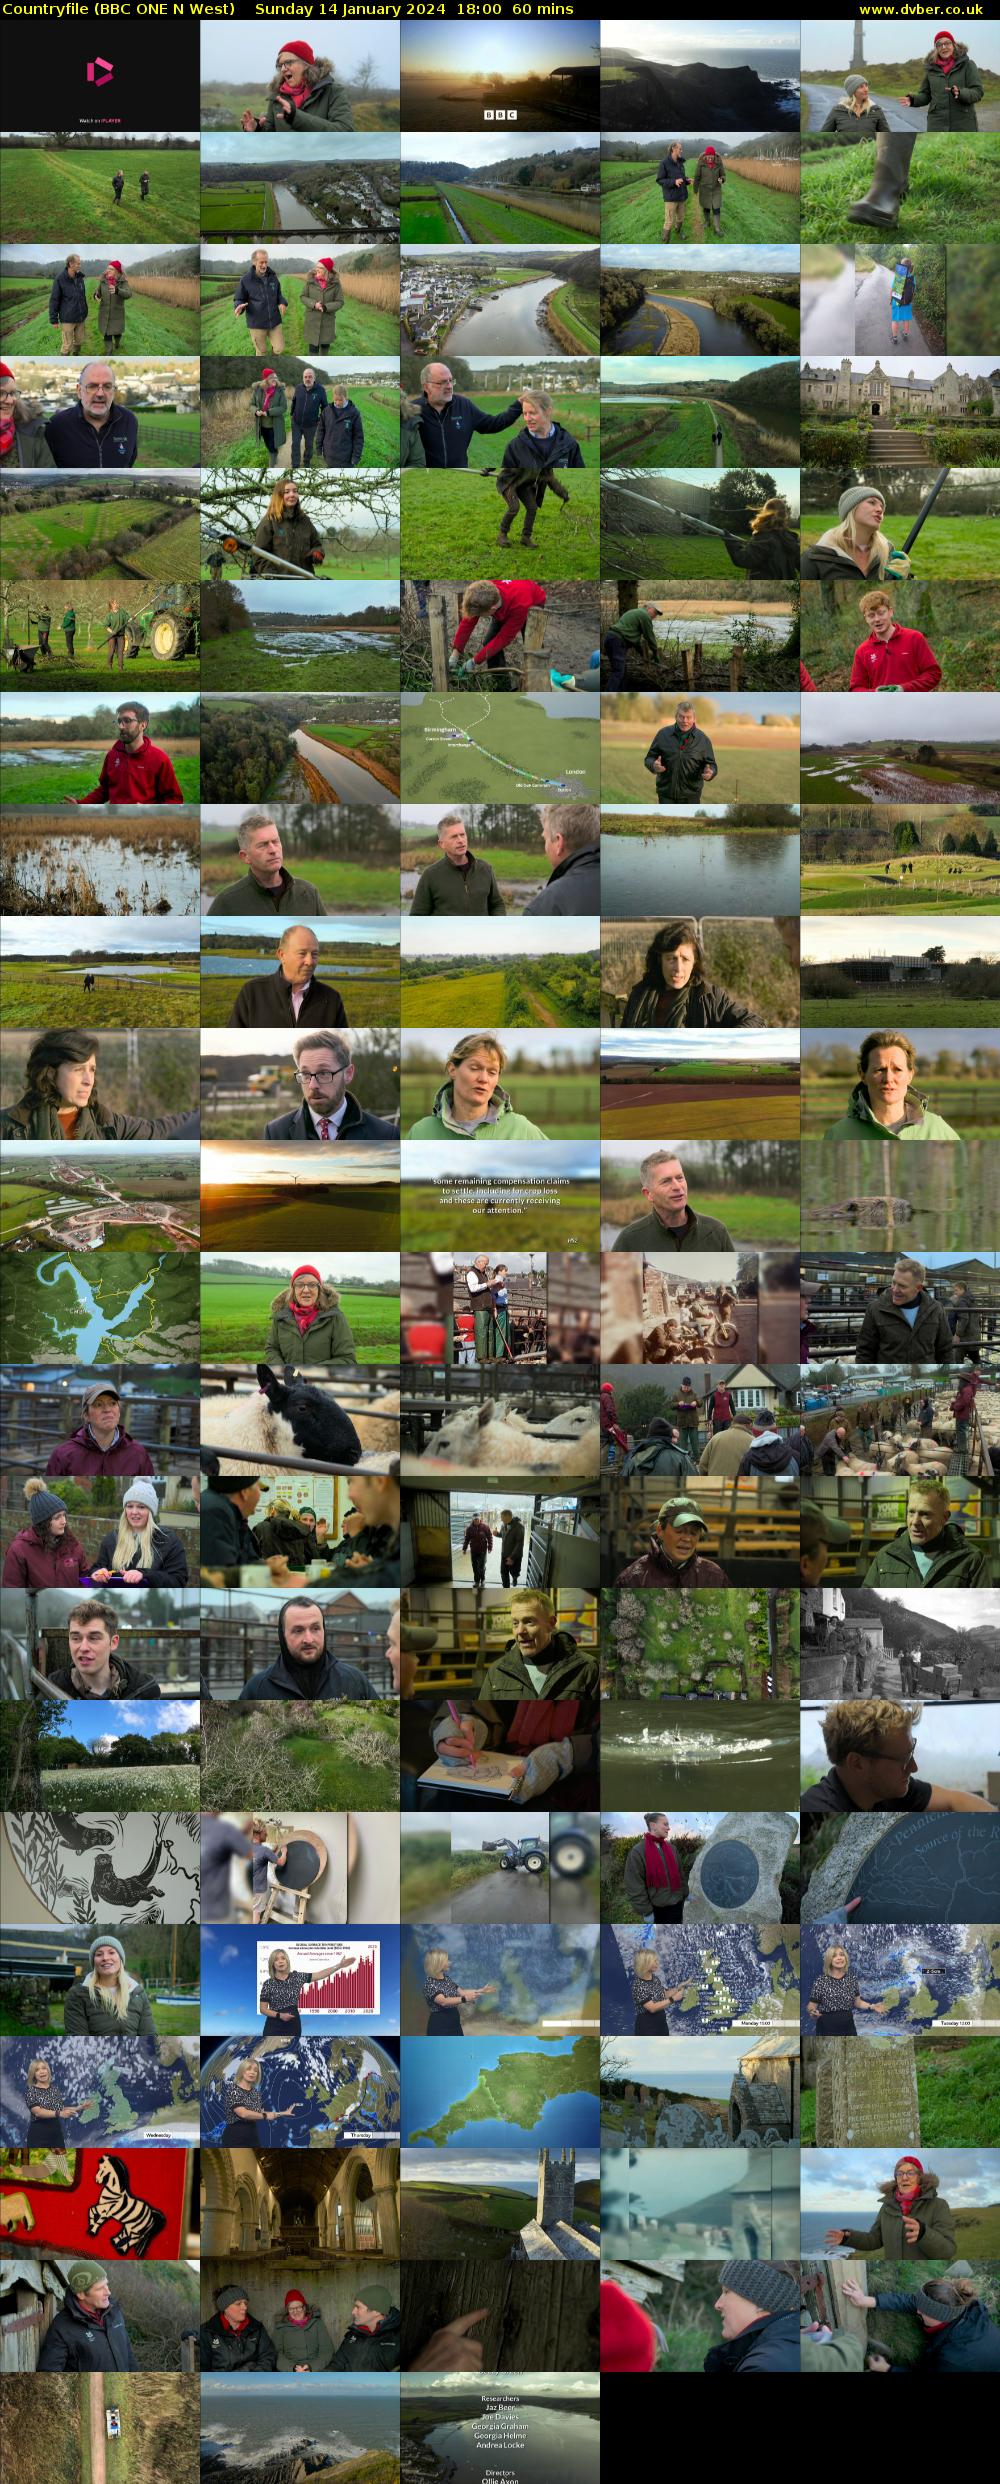 Countryfile (BBC ONE N West) Sunday 14 January 2024 18:00 - 19:00